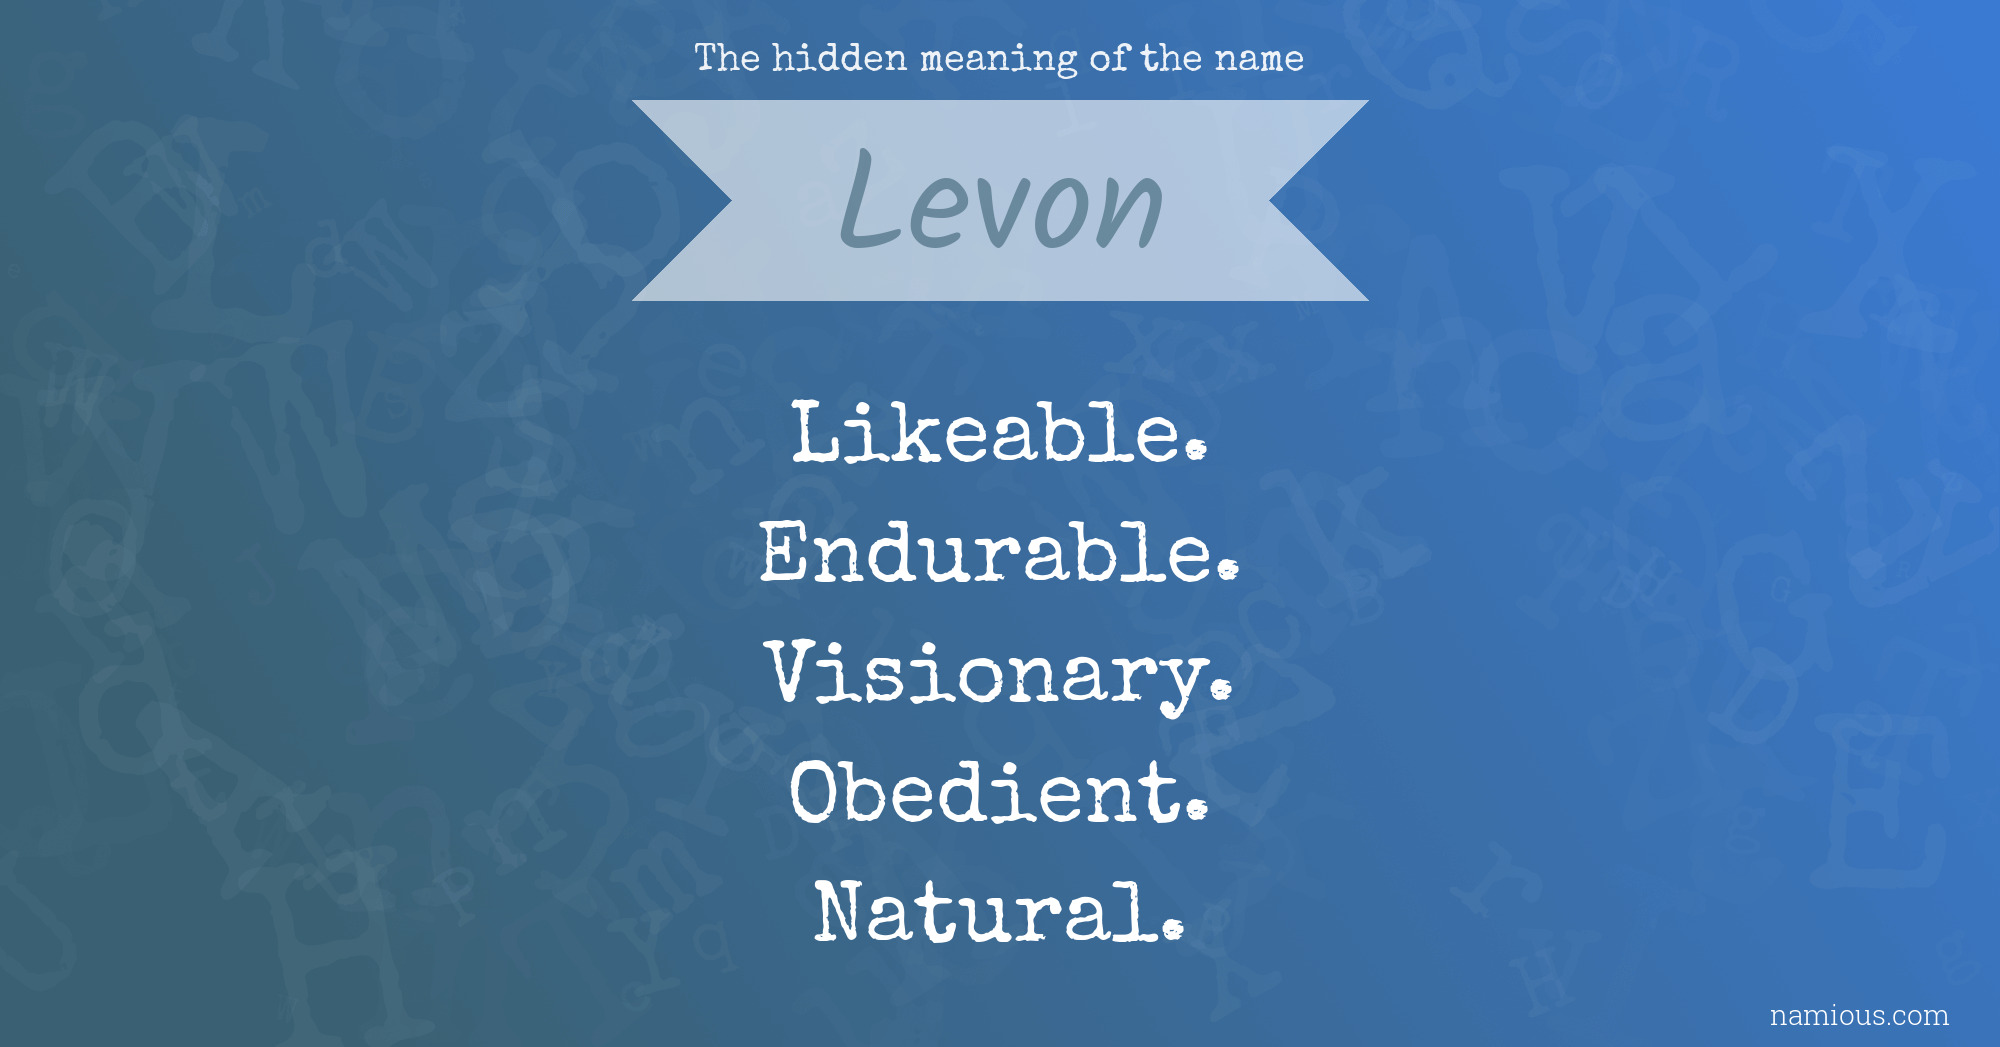 The hidden meaning of the name Levon